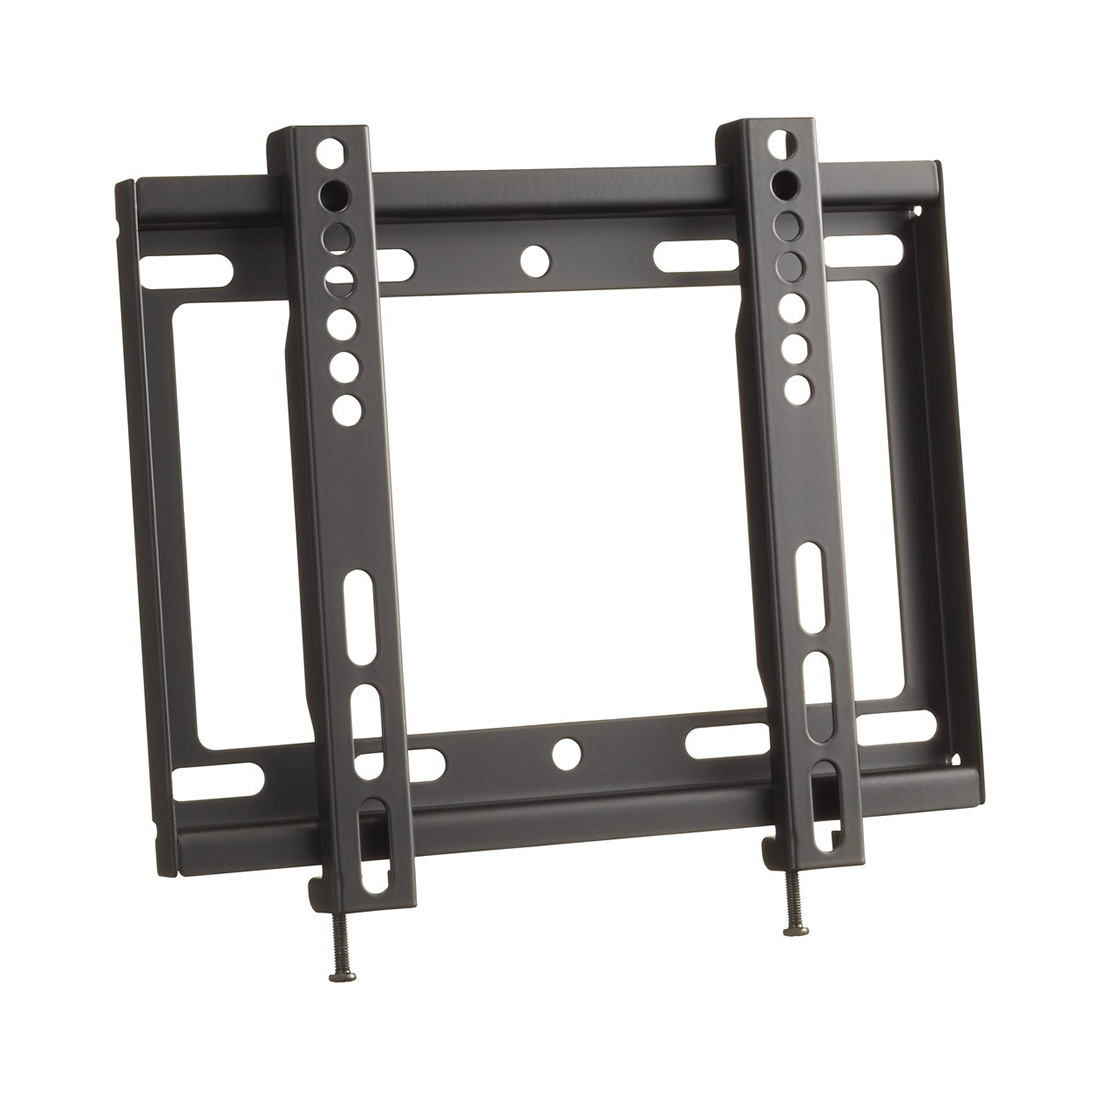 ELEXIA SUPPORT TV ROT 23-55 LPA68-443